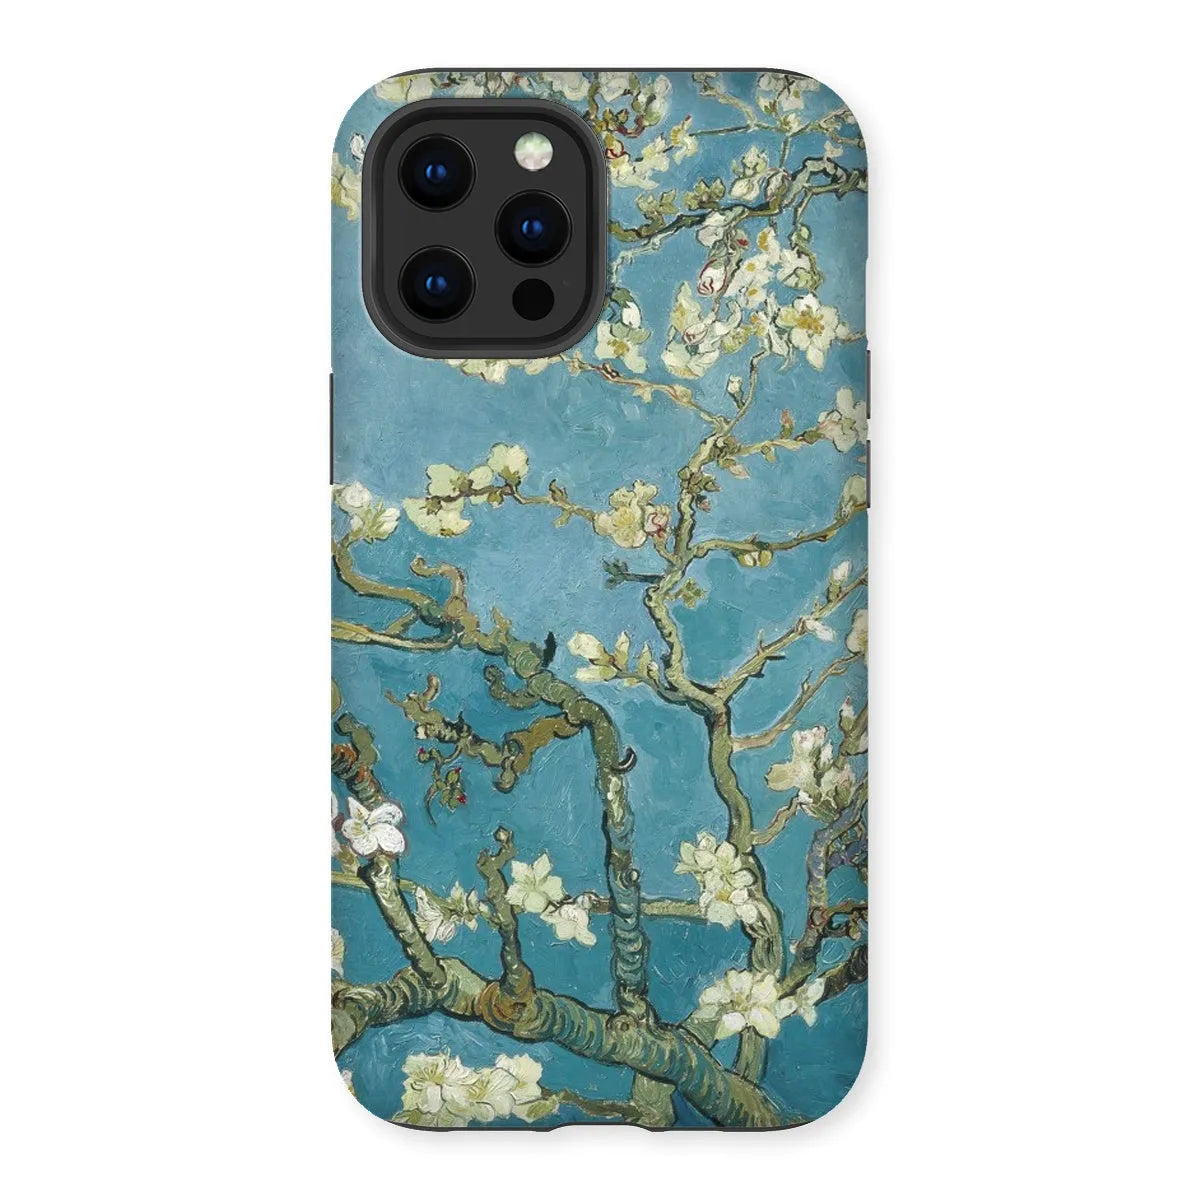 Almond Blossom - Vincent Van Gogh Aesthetic Phone Case - Iphone 12 Pro Max / Matte - Mobile Phone Cases - Aesthetic Art